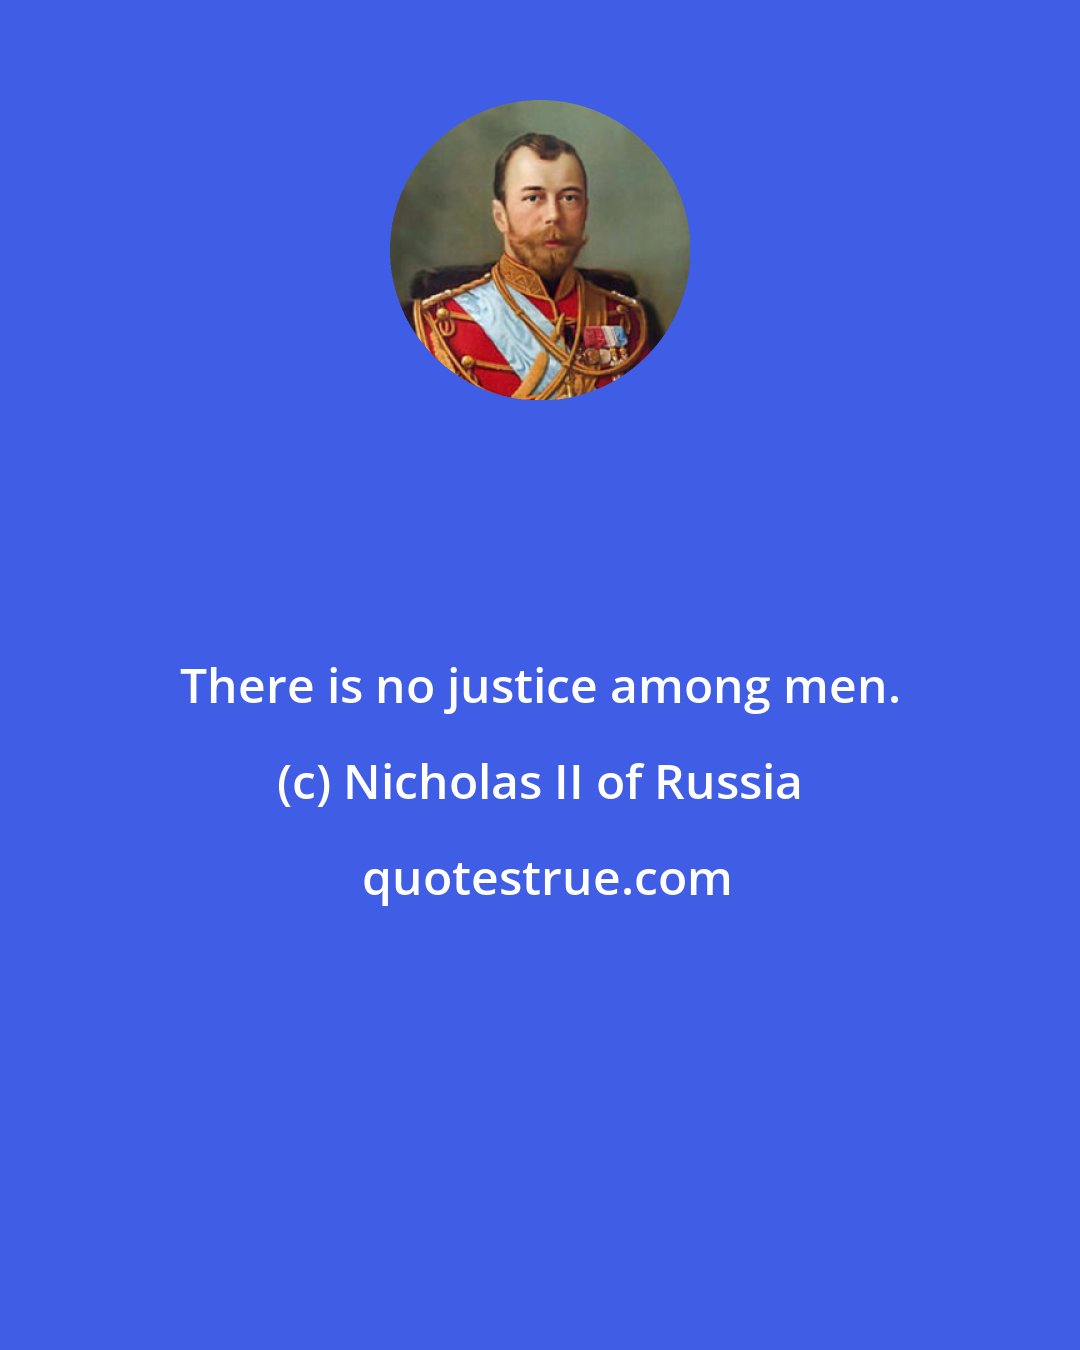 Nicholas II of Russia: There is no justice among men.